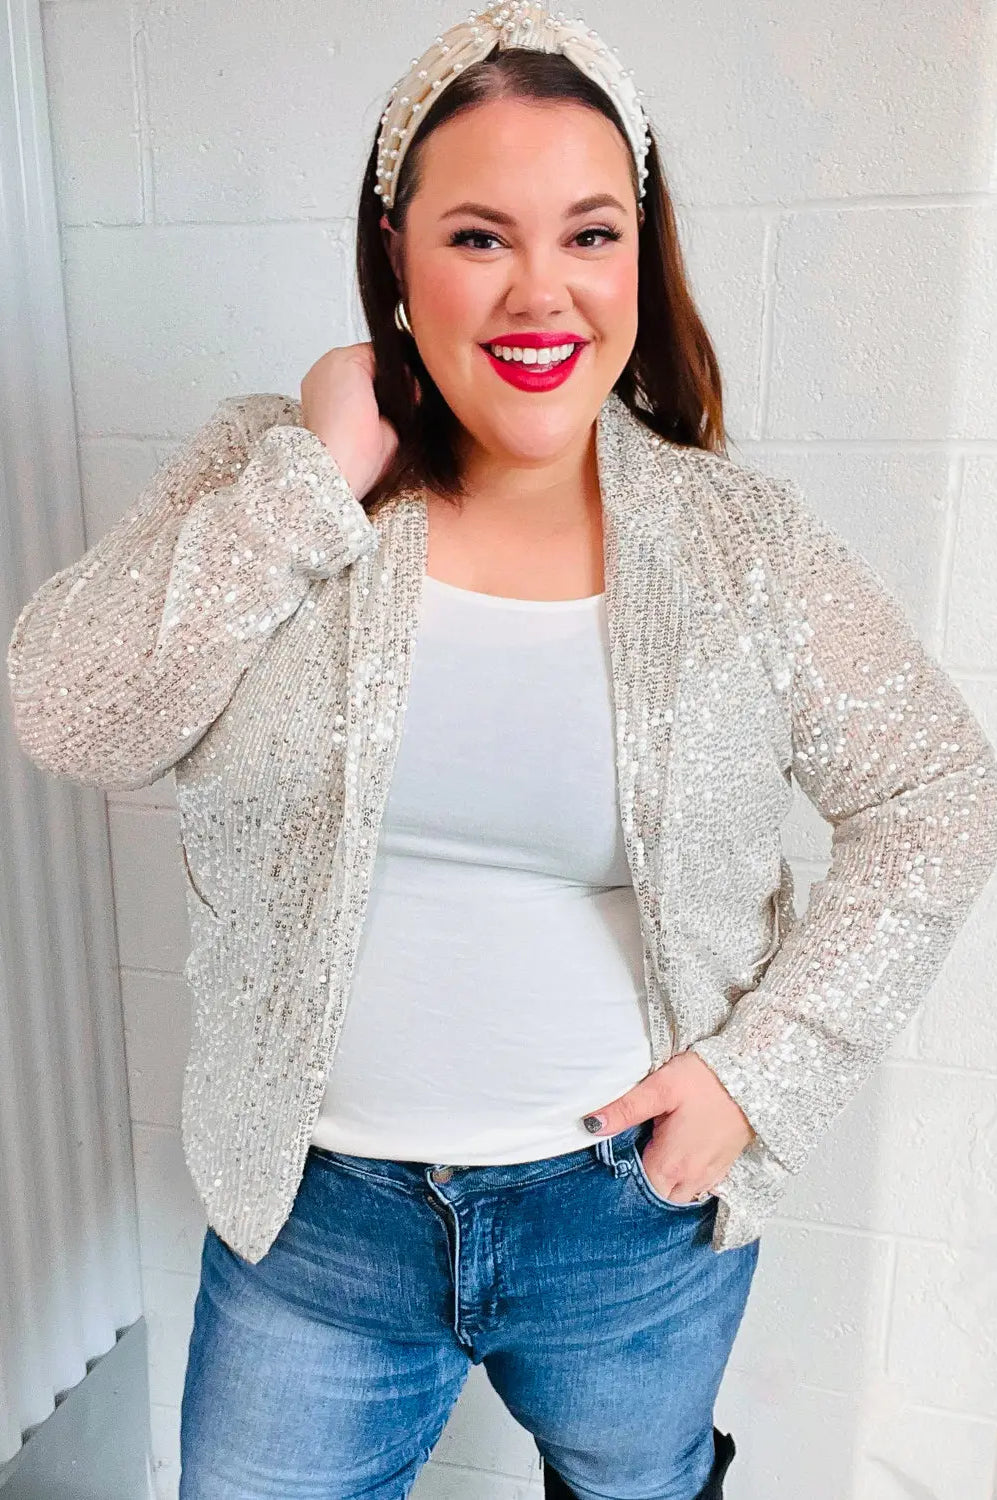 Be Your Own Star Silver Sequin Open Blazer Haptics